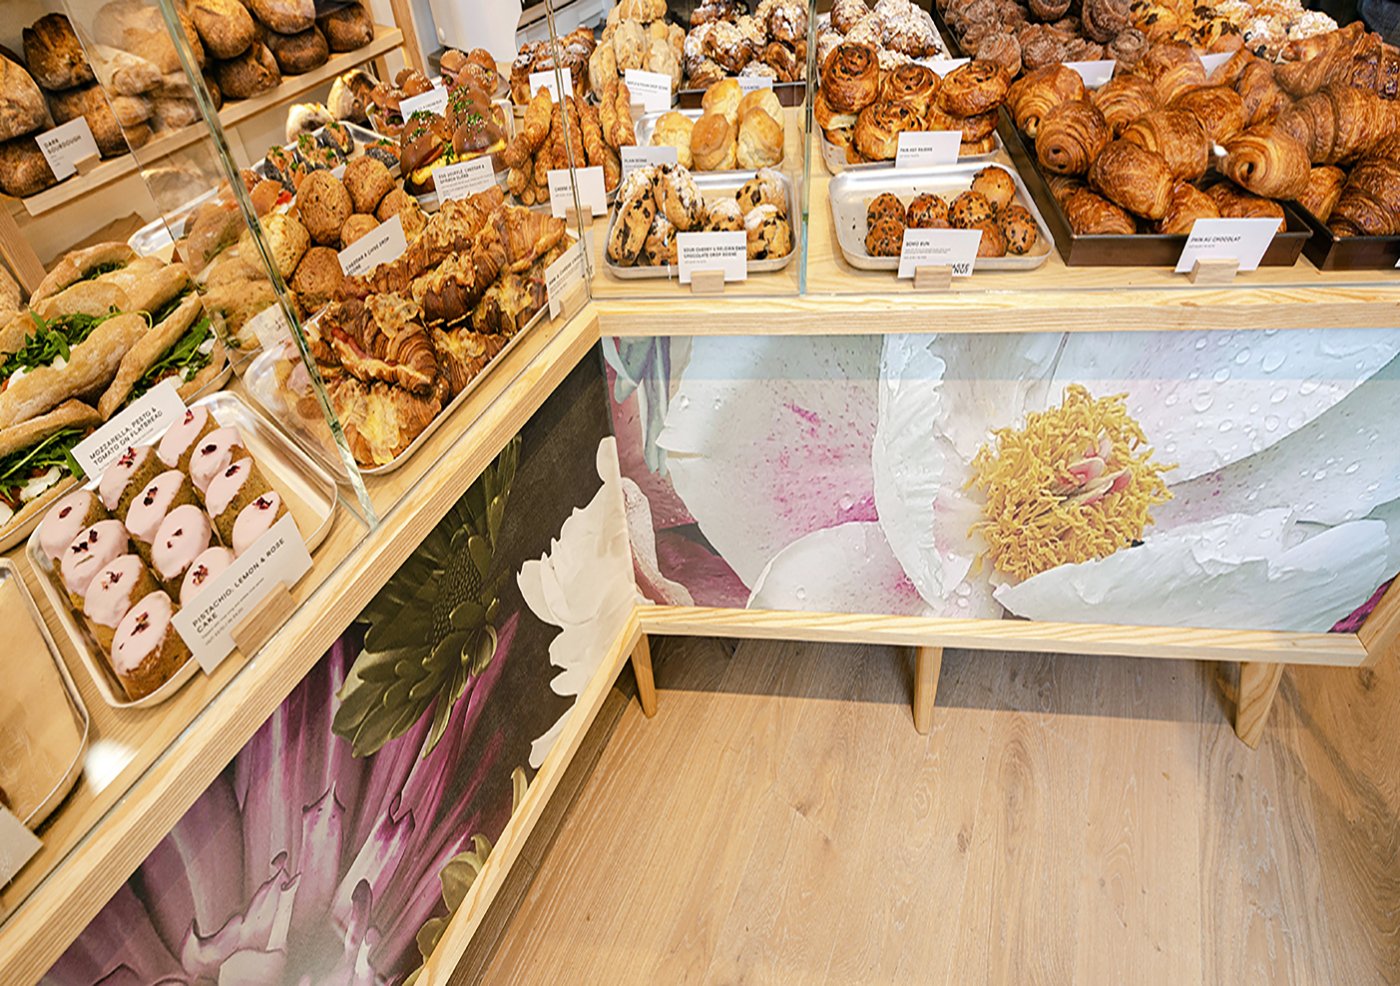 Bespoke floral wallcovering adds to GAIL's  fresh bakery brand